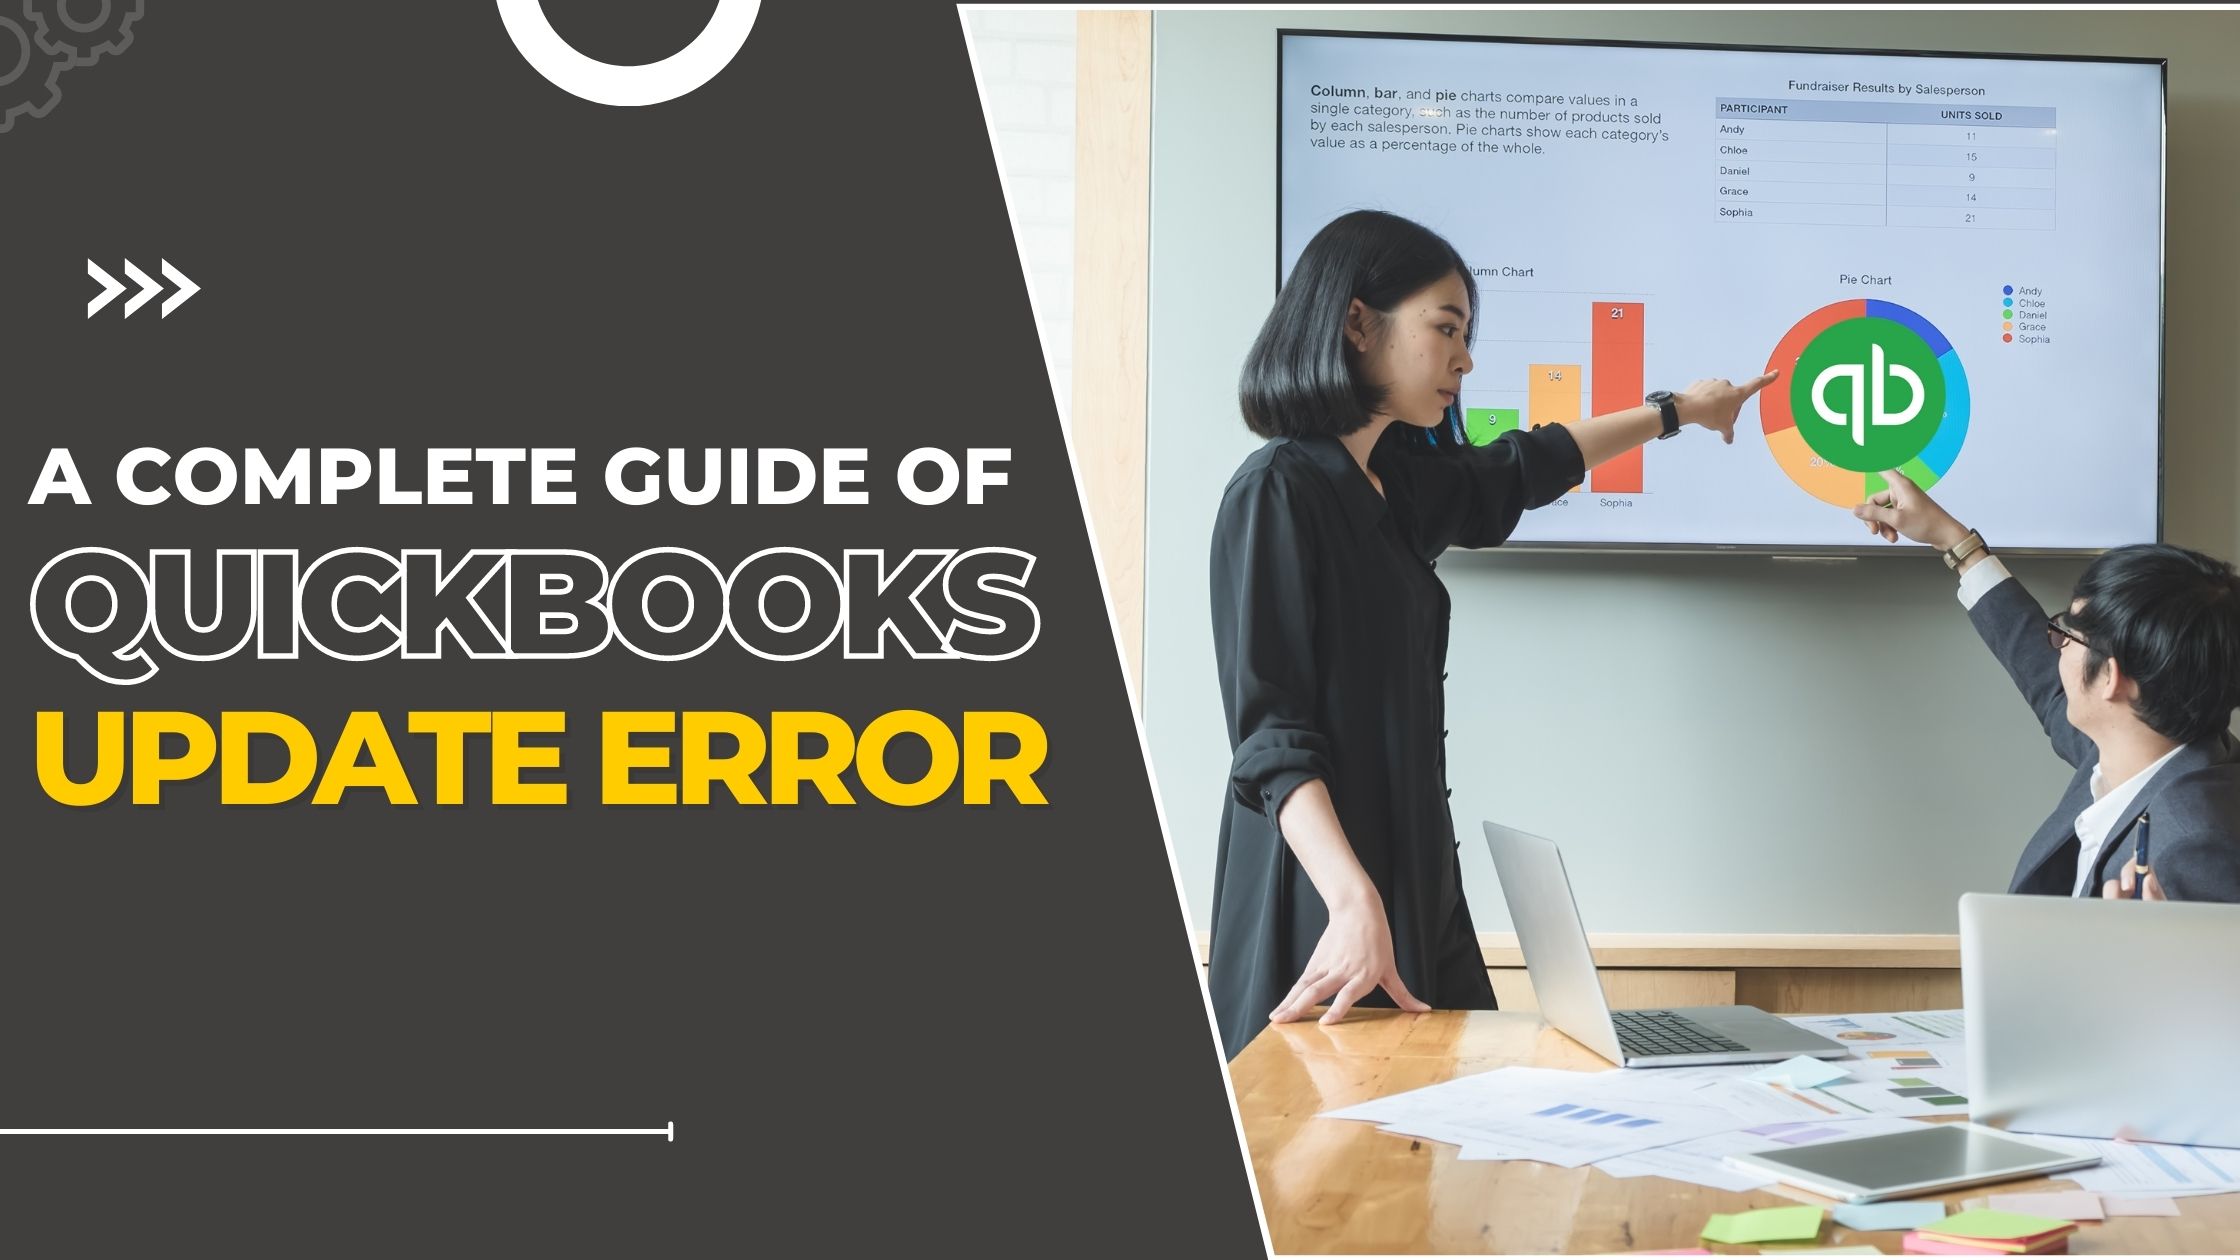 A Complete Guide of QuickBooks Update Error – Causes and Fixes